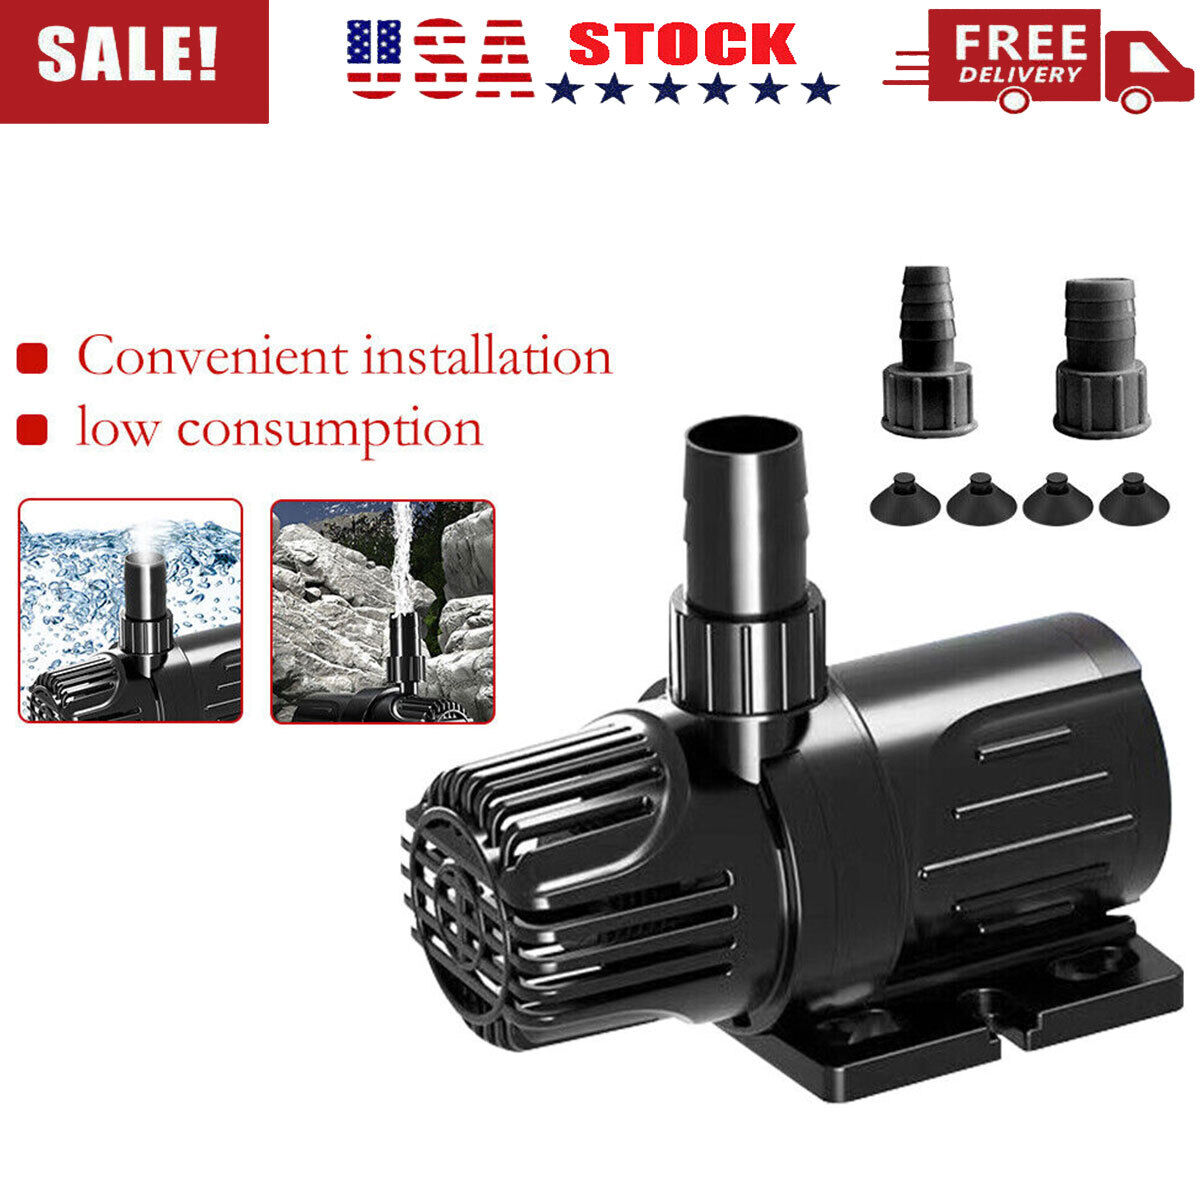 DC 12V High-Pressure Brushless Submersible Water Pump for Garden Villa Fountain